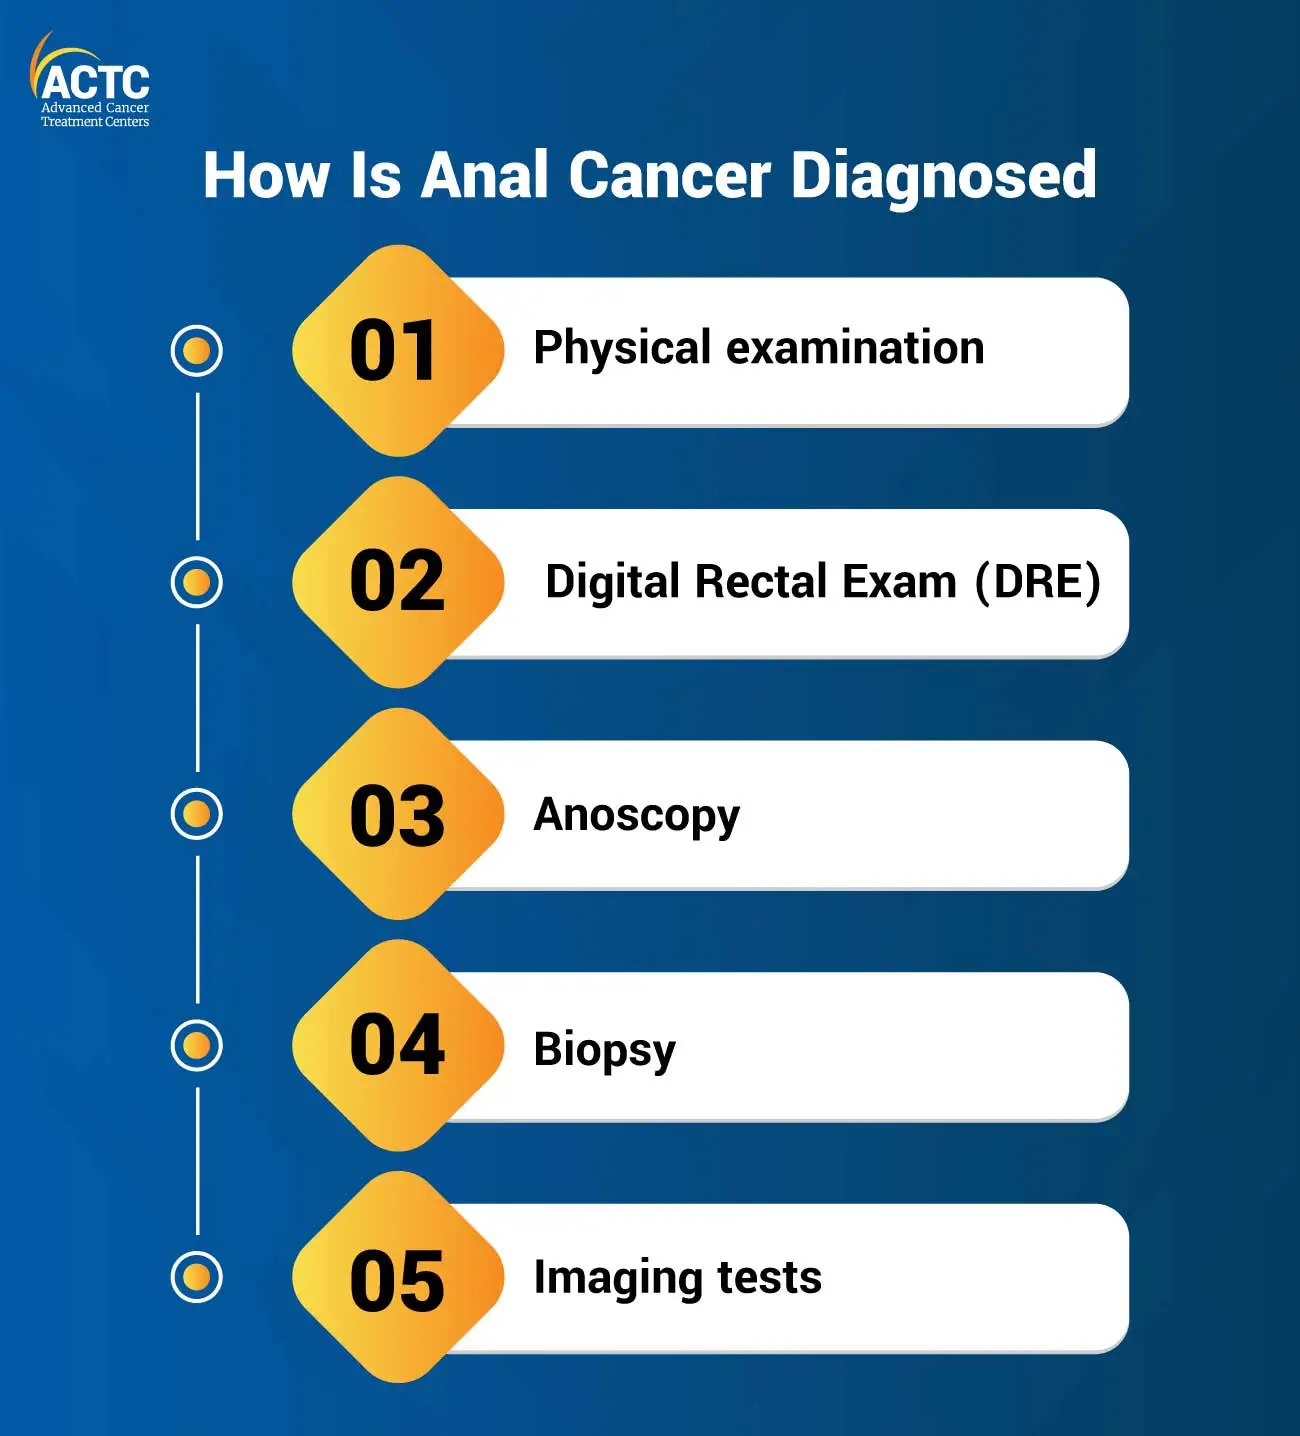 How Is Anal Cancer Diagnosed?